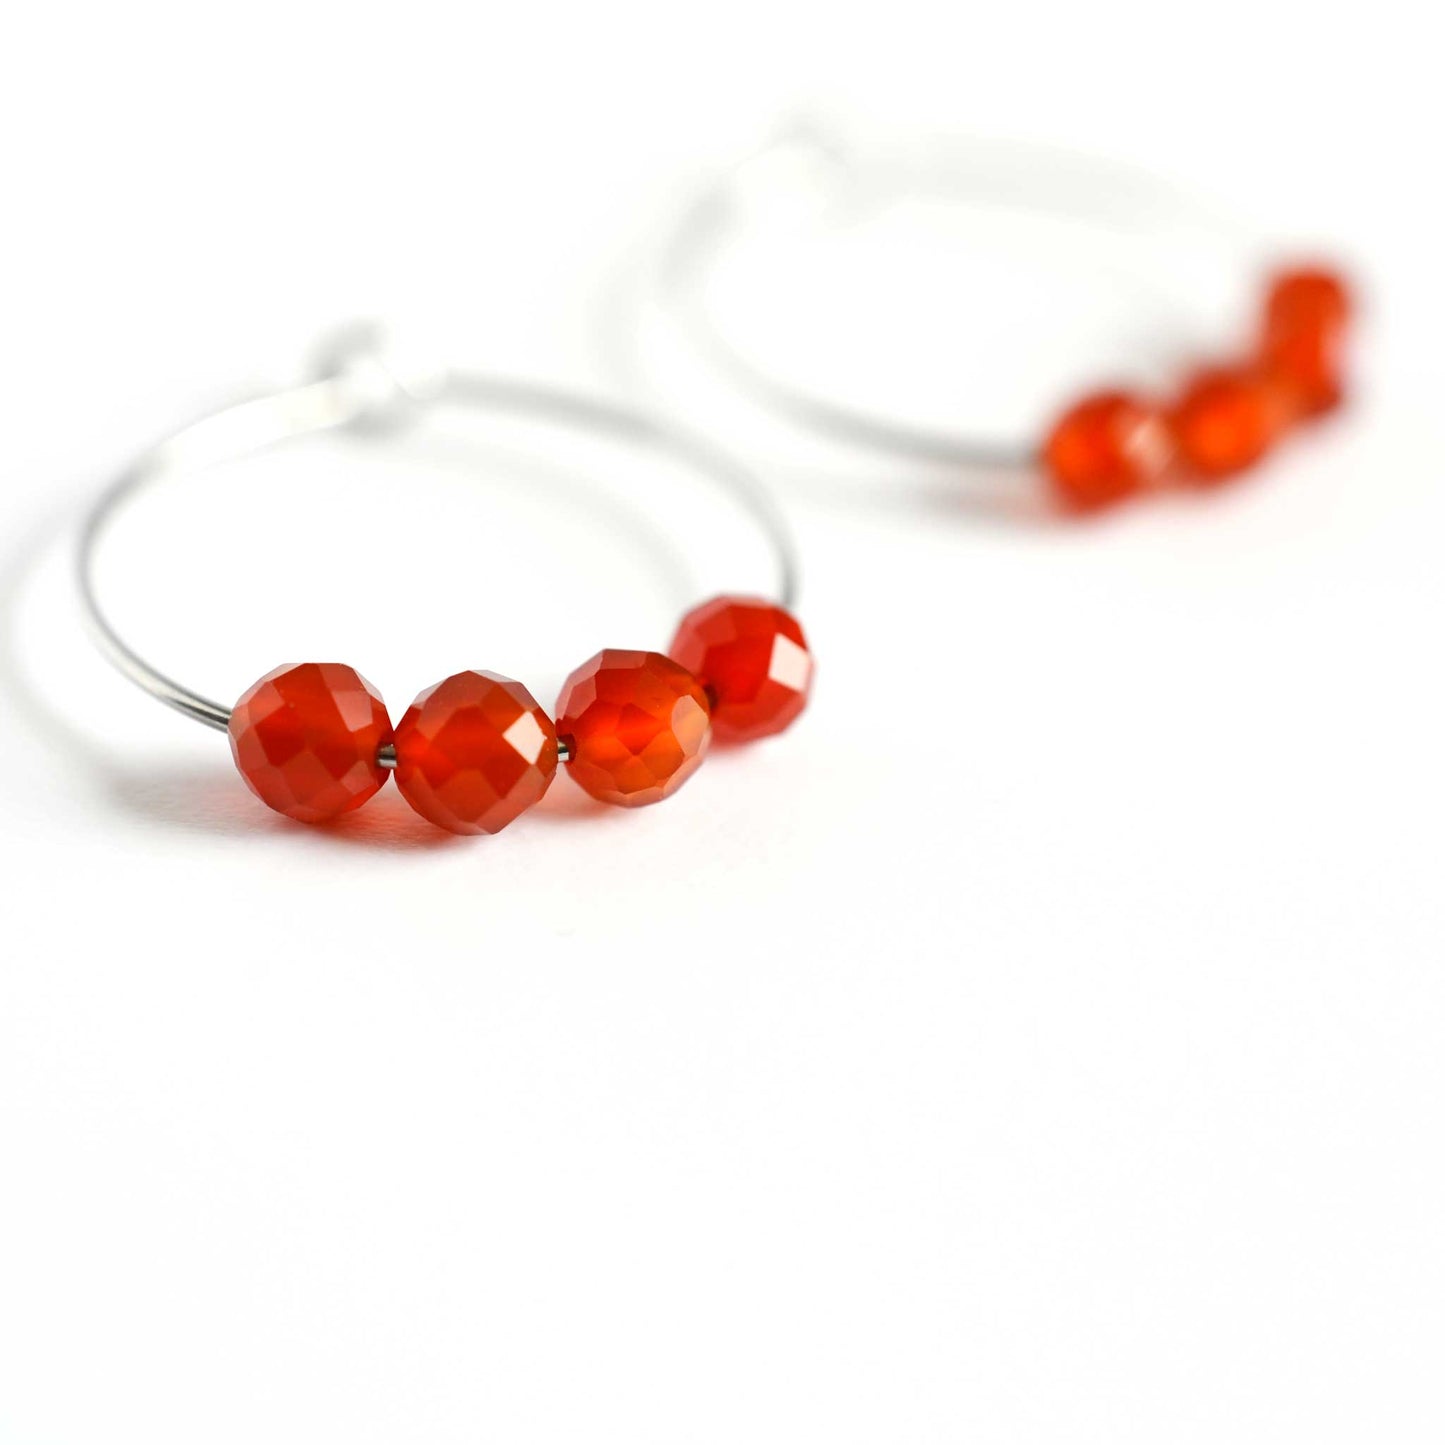 Close up of Carnelian hoop earrings with four small round faceted orange Carnelian gemstones